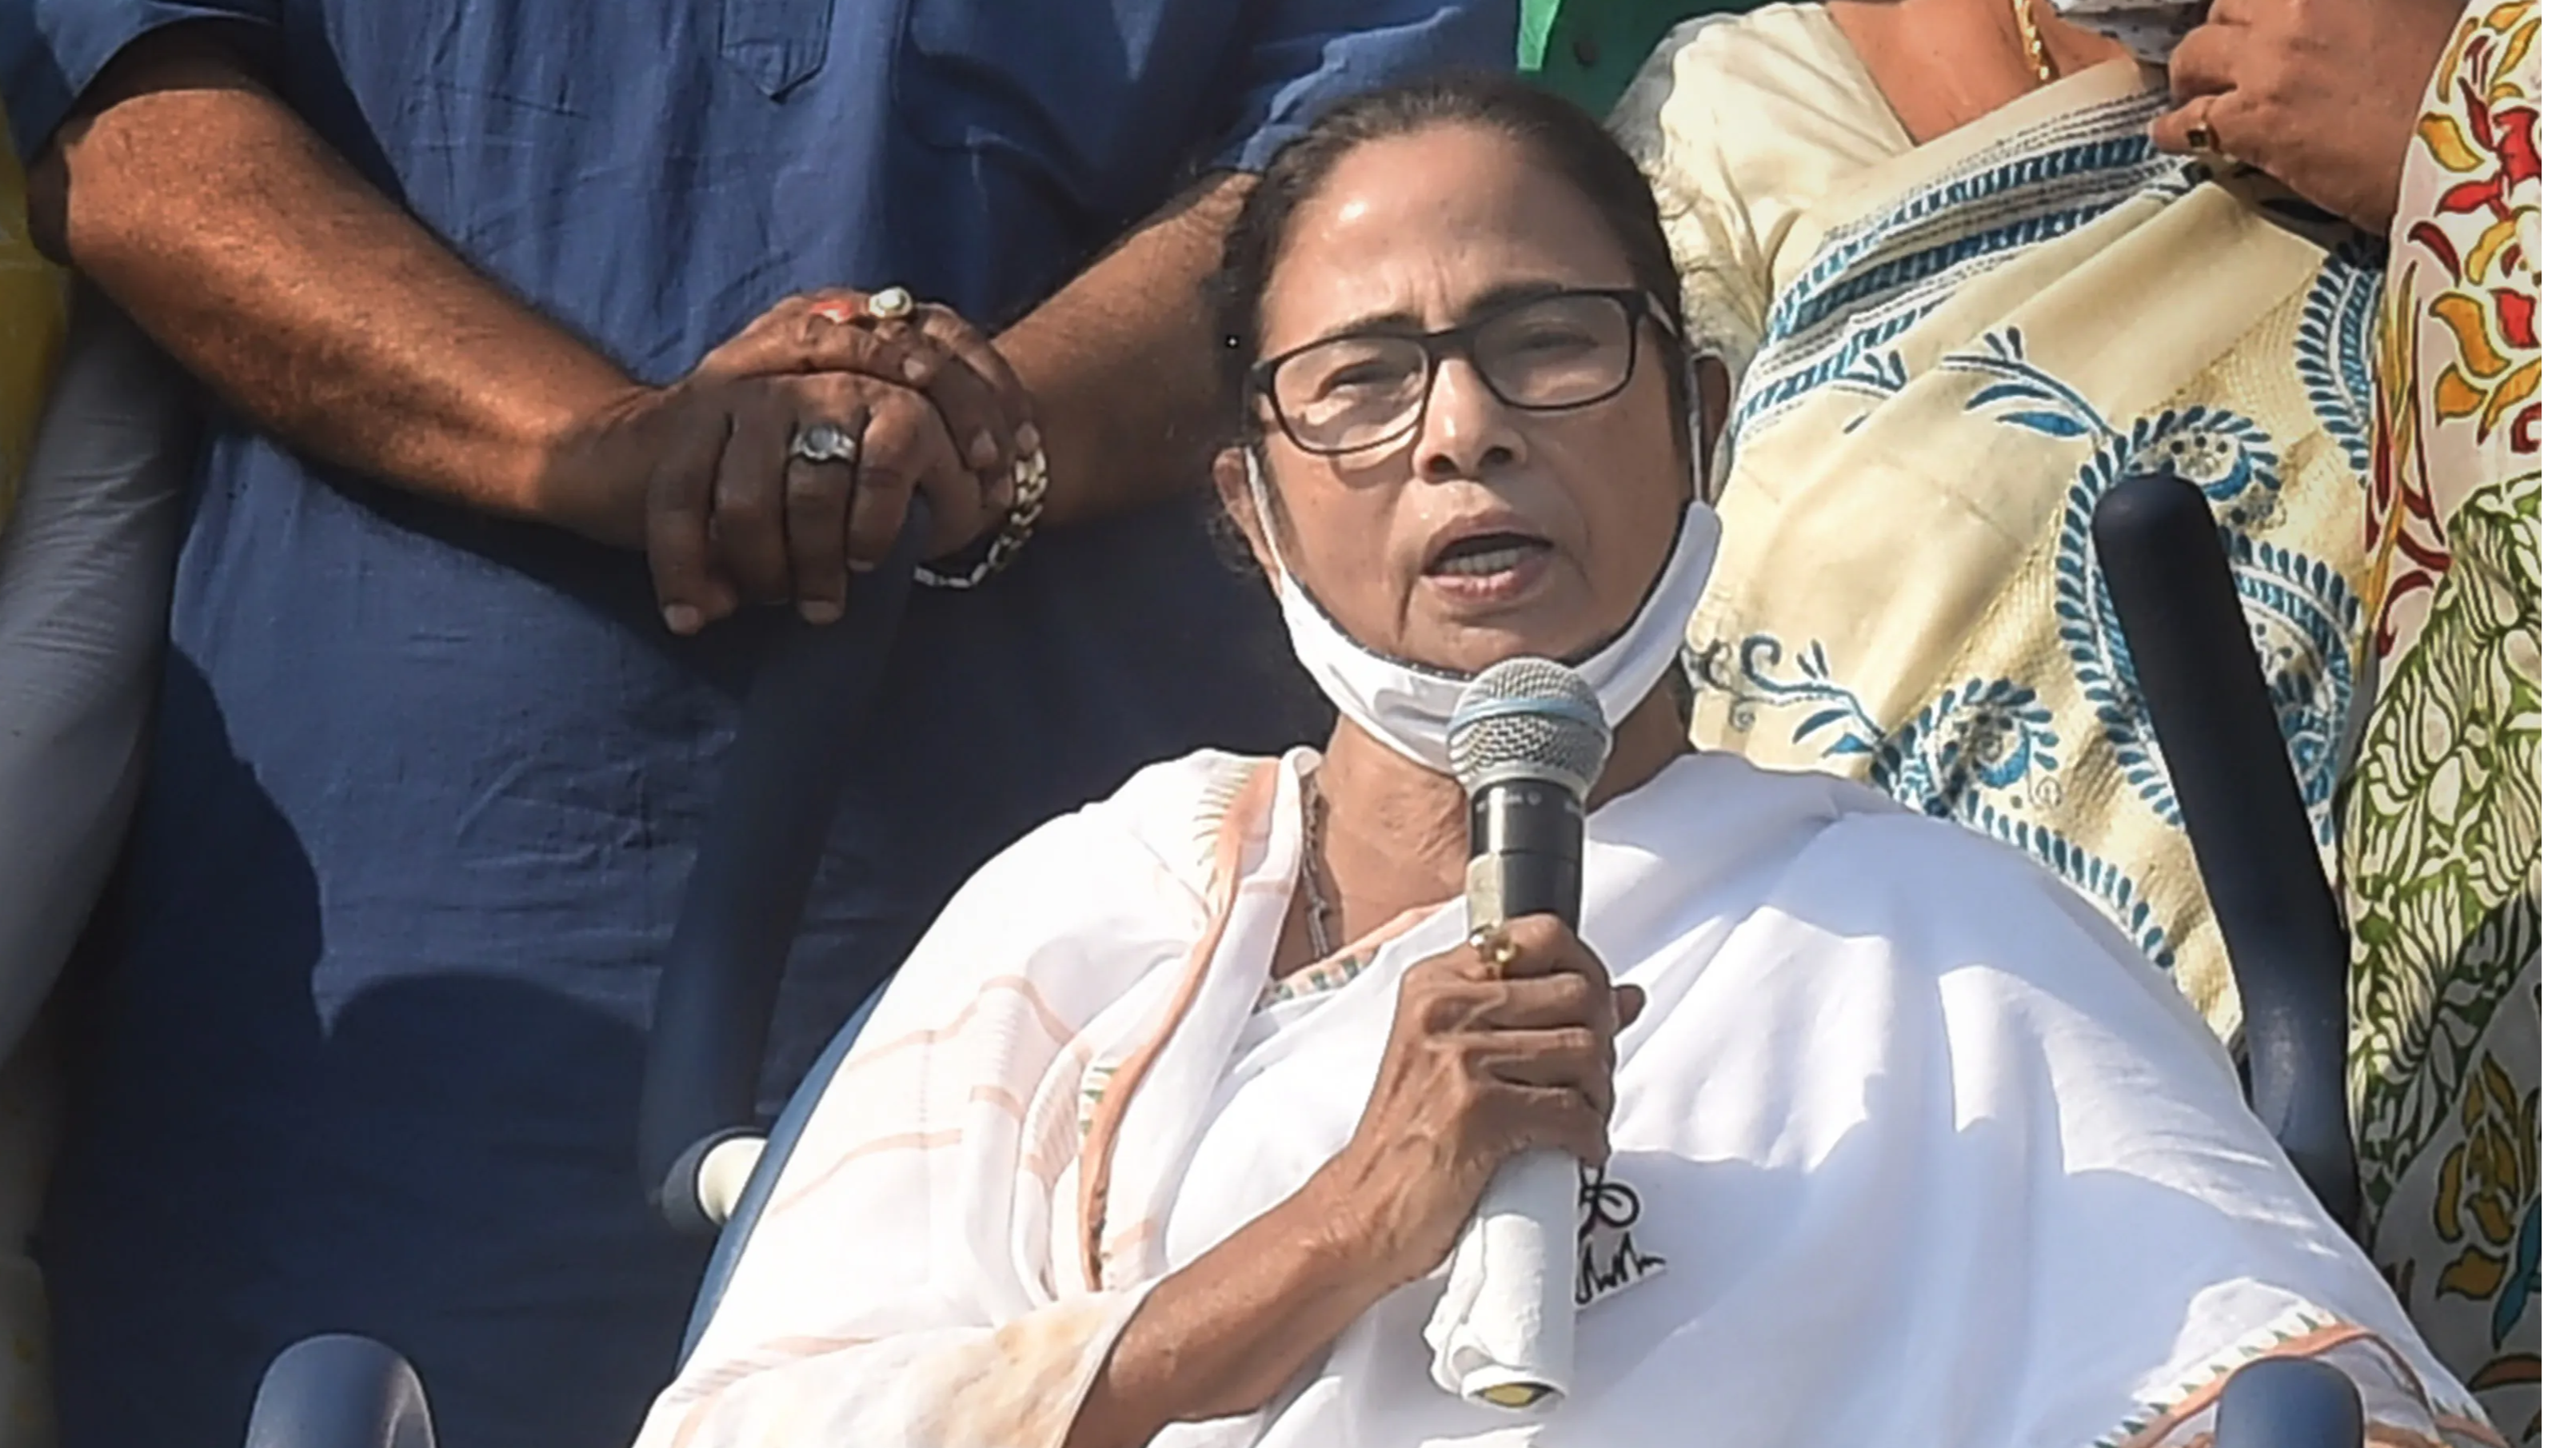 Mamata Banerjee promises ‘government at your doorstep’ in poll manifesto